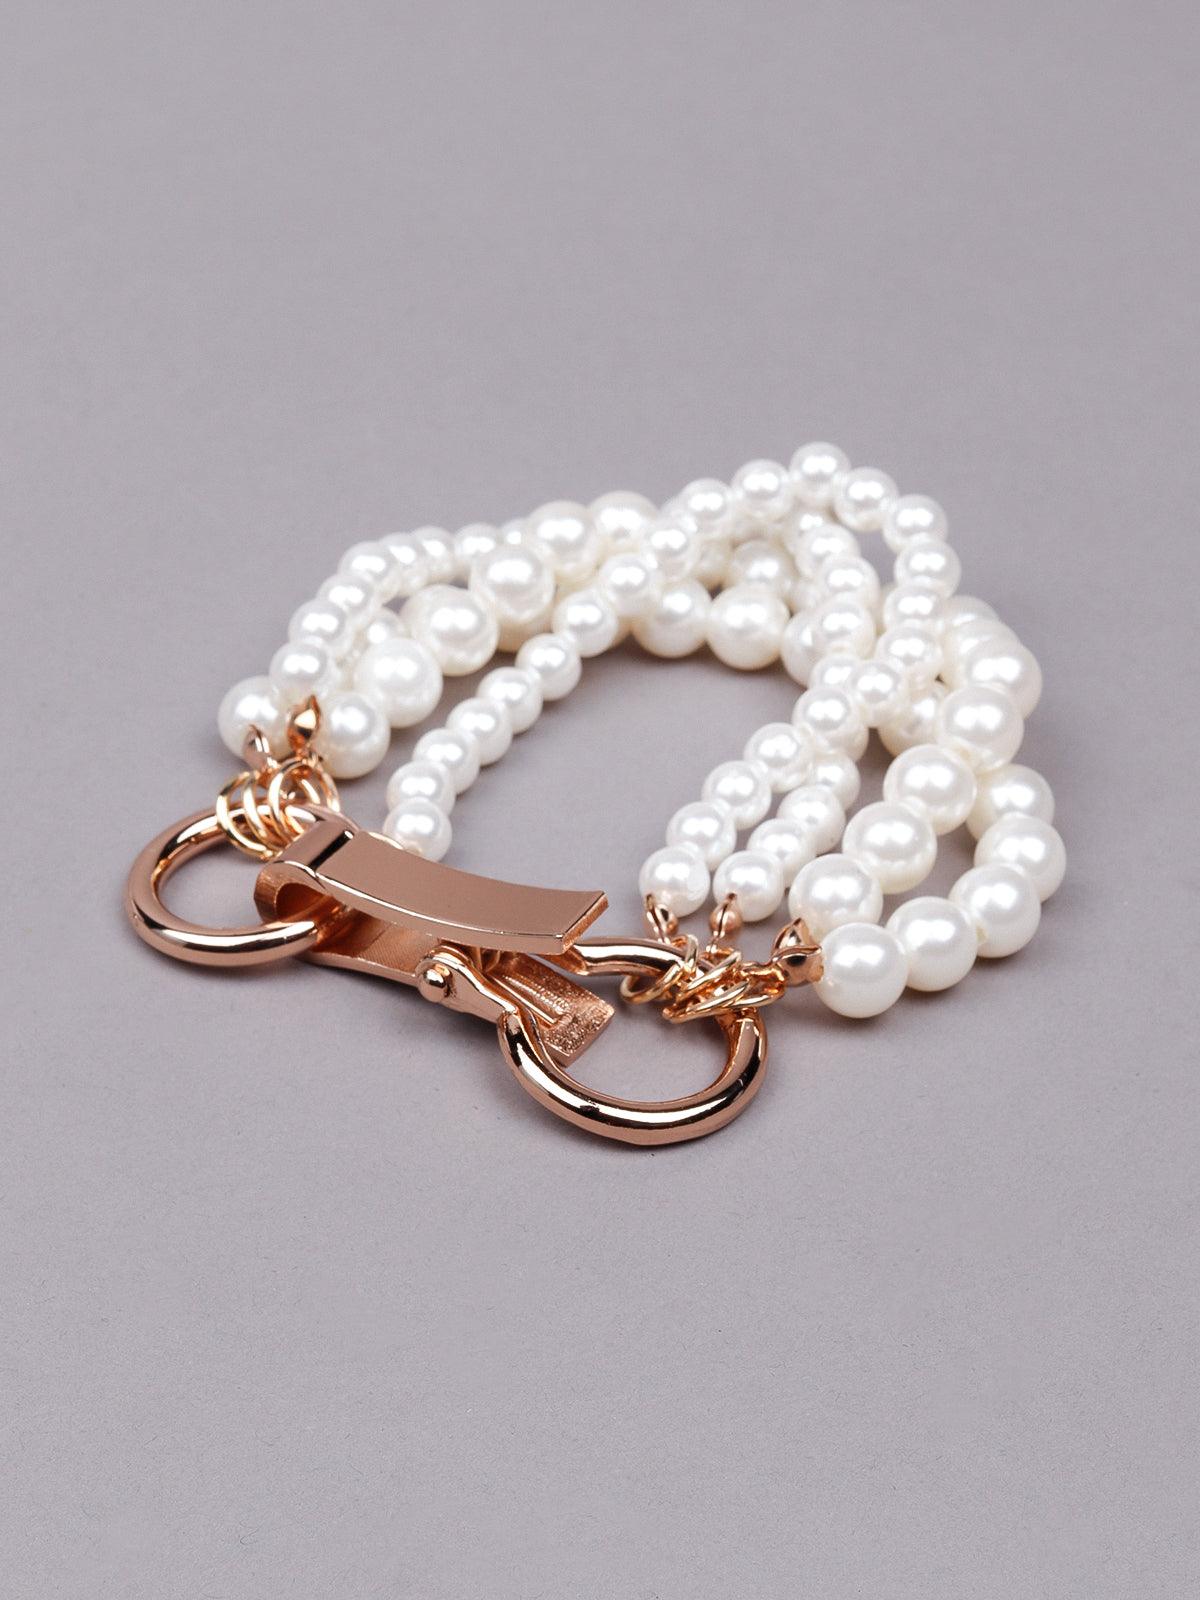 Layered exquisite pearl bracelet - Odette